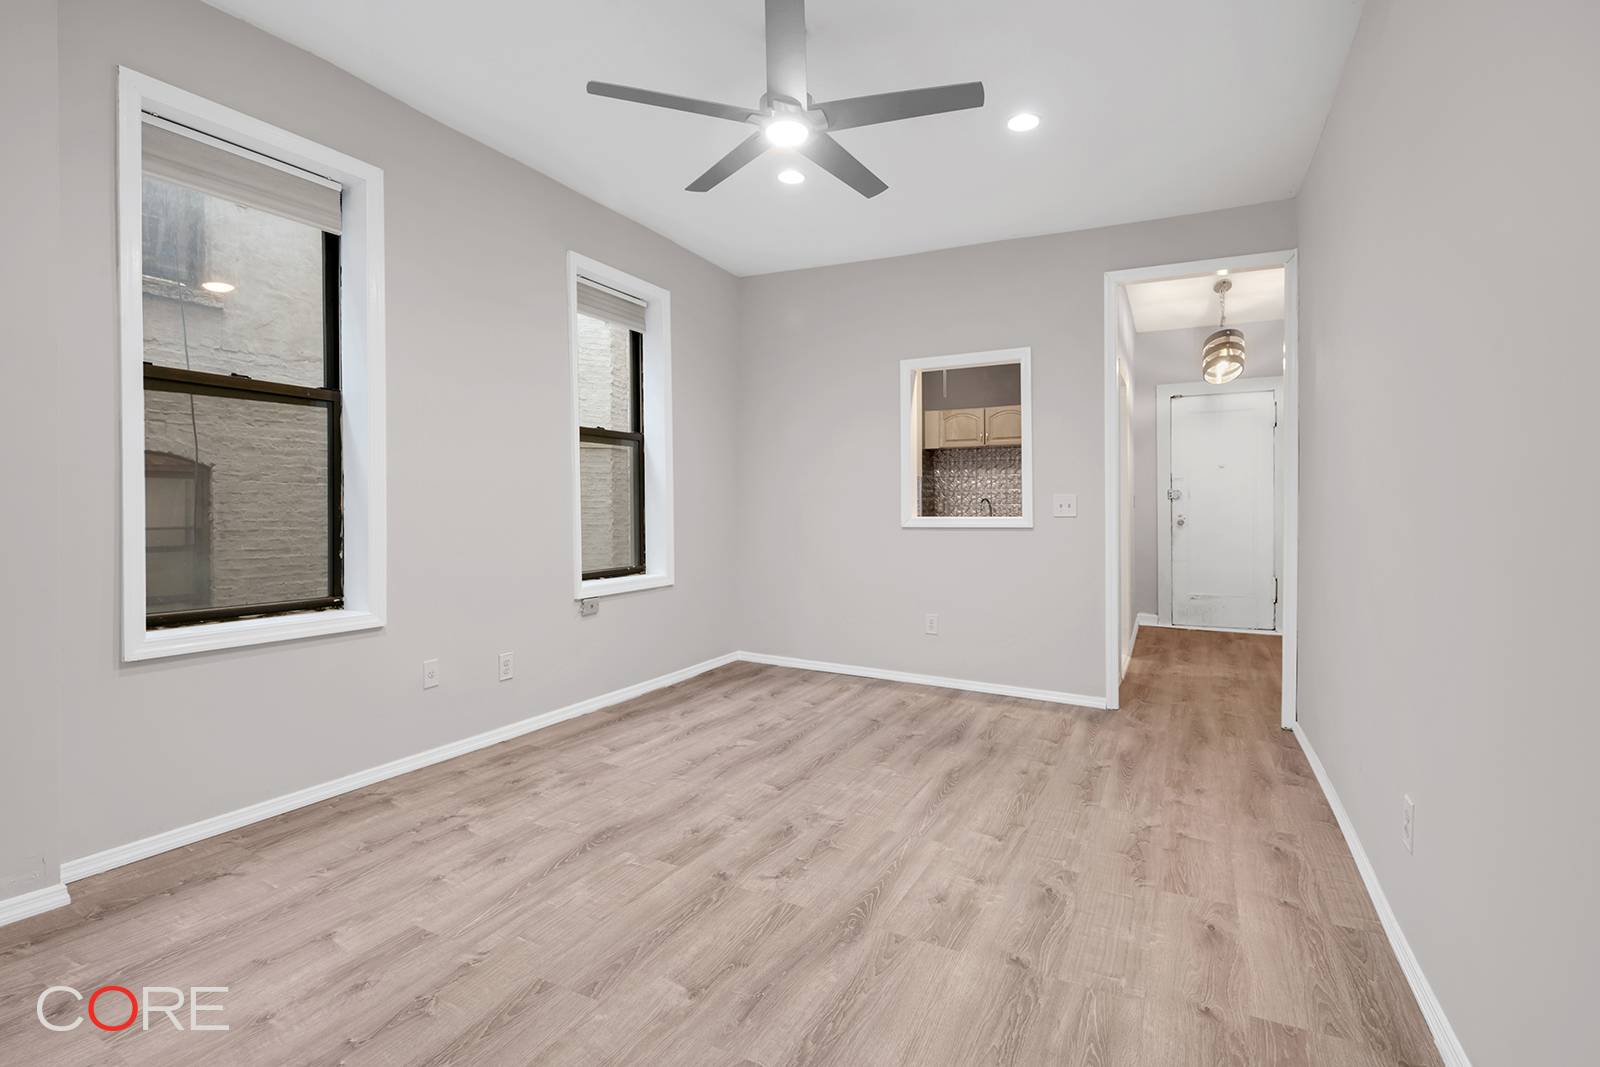 Situated on the coveted edge of charming West Village, this well laid out, high floor, one bedroom apartment is available for the first time in years.